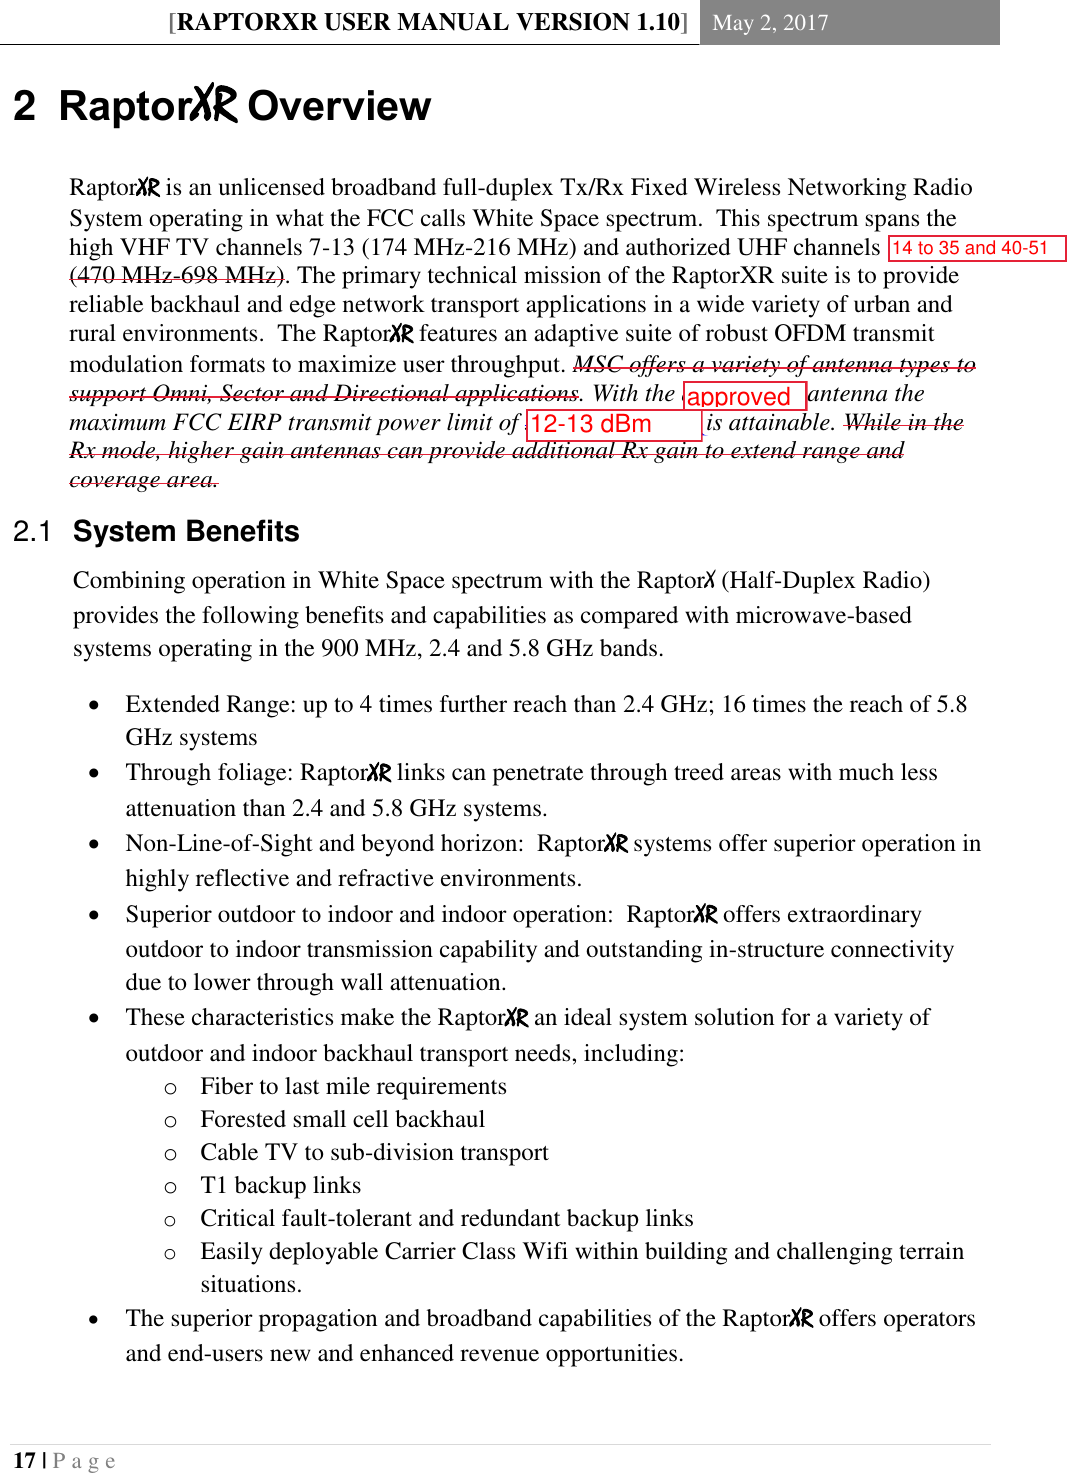 [RAPTORXR USER MANUAL VERSION 1.10] May 2, 2017  17 | P a g e   2  RaptorXR Overview RaptorXR is an unlicensed broadband full-duplex Tx/Rx Fixed Wireless Networking Radio System operating in what the FCC calls White Space spectrum.  This spectrum spans the high VHF TV channels 7-13 (174 MHz-216 MHz) and authorized UHF channels 14-51 (470 MHz-698 MHz). The primary technical mission of the RaptorXR suite is to provide reliable backhaul and edge network transport applications in a wide variety of urban and rural environments.  The RaptorXR features an adaptive suite of robust OFDM transmit modulation formats to maximize user throughput. MSC offers a variety of antenna types to support Omni, Sector and Directional applications. With the appropriate antenna the maximum FCC EIRP transmit power limit of 36 dBm (4 Watts) is attainable. While in the Rx mode, higher gain antennas can provide additional Rx gain to extend range and coverage area.  System Benefits  2.1Combining operation in White Space spectrum with the RaptorX (Half-Duplex Radio) provides the following benefits and capabilities as compared with microwave-based systems operating in the 900 MHz, 2.4 and 5.8 GHz bands.  Extended Range: up to 4 times further reach than 2.4 GHz; 16 times the reach of 5.8 GHz systems  Through foliage: RaptorXR links can penetrate through treed areas with much less attenuation than 2.4 and 5.8 GHz systems.  Non-Line-of-Sight and beyond horizon:  RaptorXR systems offer superior operation in highly reflective and refractive environments.  Superior outdoor to indoor and indoor operation:  RaptorXR offers extraordinary outdoor to indoor transmission capability and outstanding in-structure connectivity due to lower through wall attenuation.  These characteristics make the RaptorXR an ideal system solution for a variety of outdoor and indoor backhaul transport needs, including: o Fiber to last mile requirements o Forested small cell backhaul o Cable TV to sub-division transport o T1 backup links o Critical fault-tolerant and redundant backup links o Easily deployable Carrier Class Wifi within building and challenging terrain situations.  The superior propagation and broadband capabilities of the RaptorXR offers operators and end-users new and enhanced revenue opportunities. 14 to 35 and 40-5112-13 dBmapproved